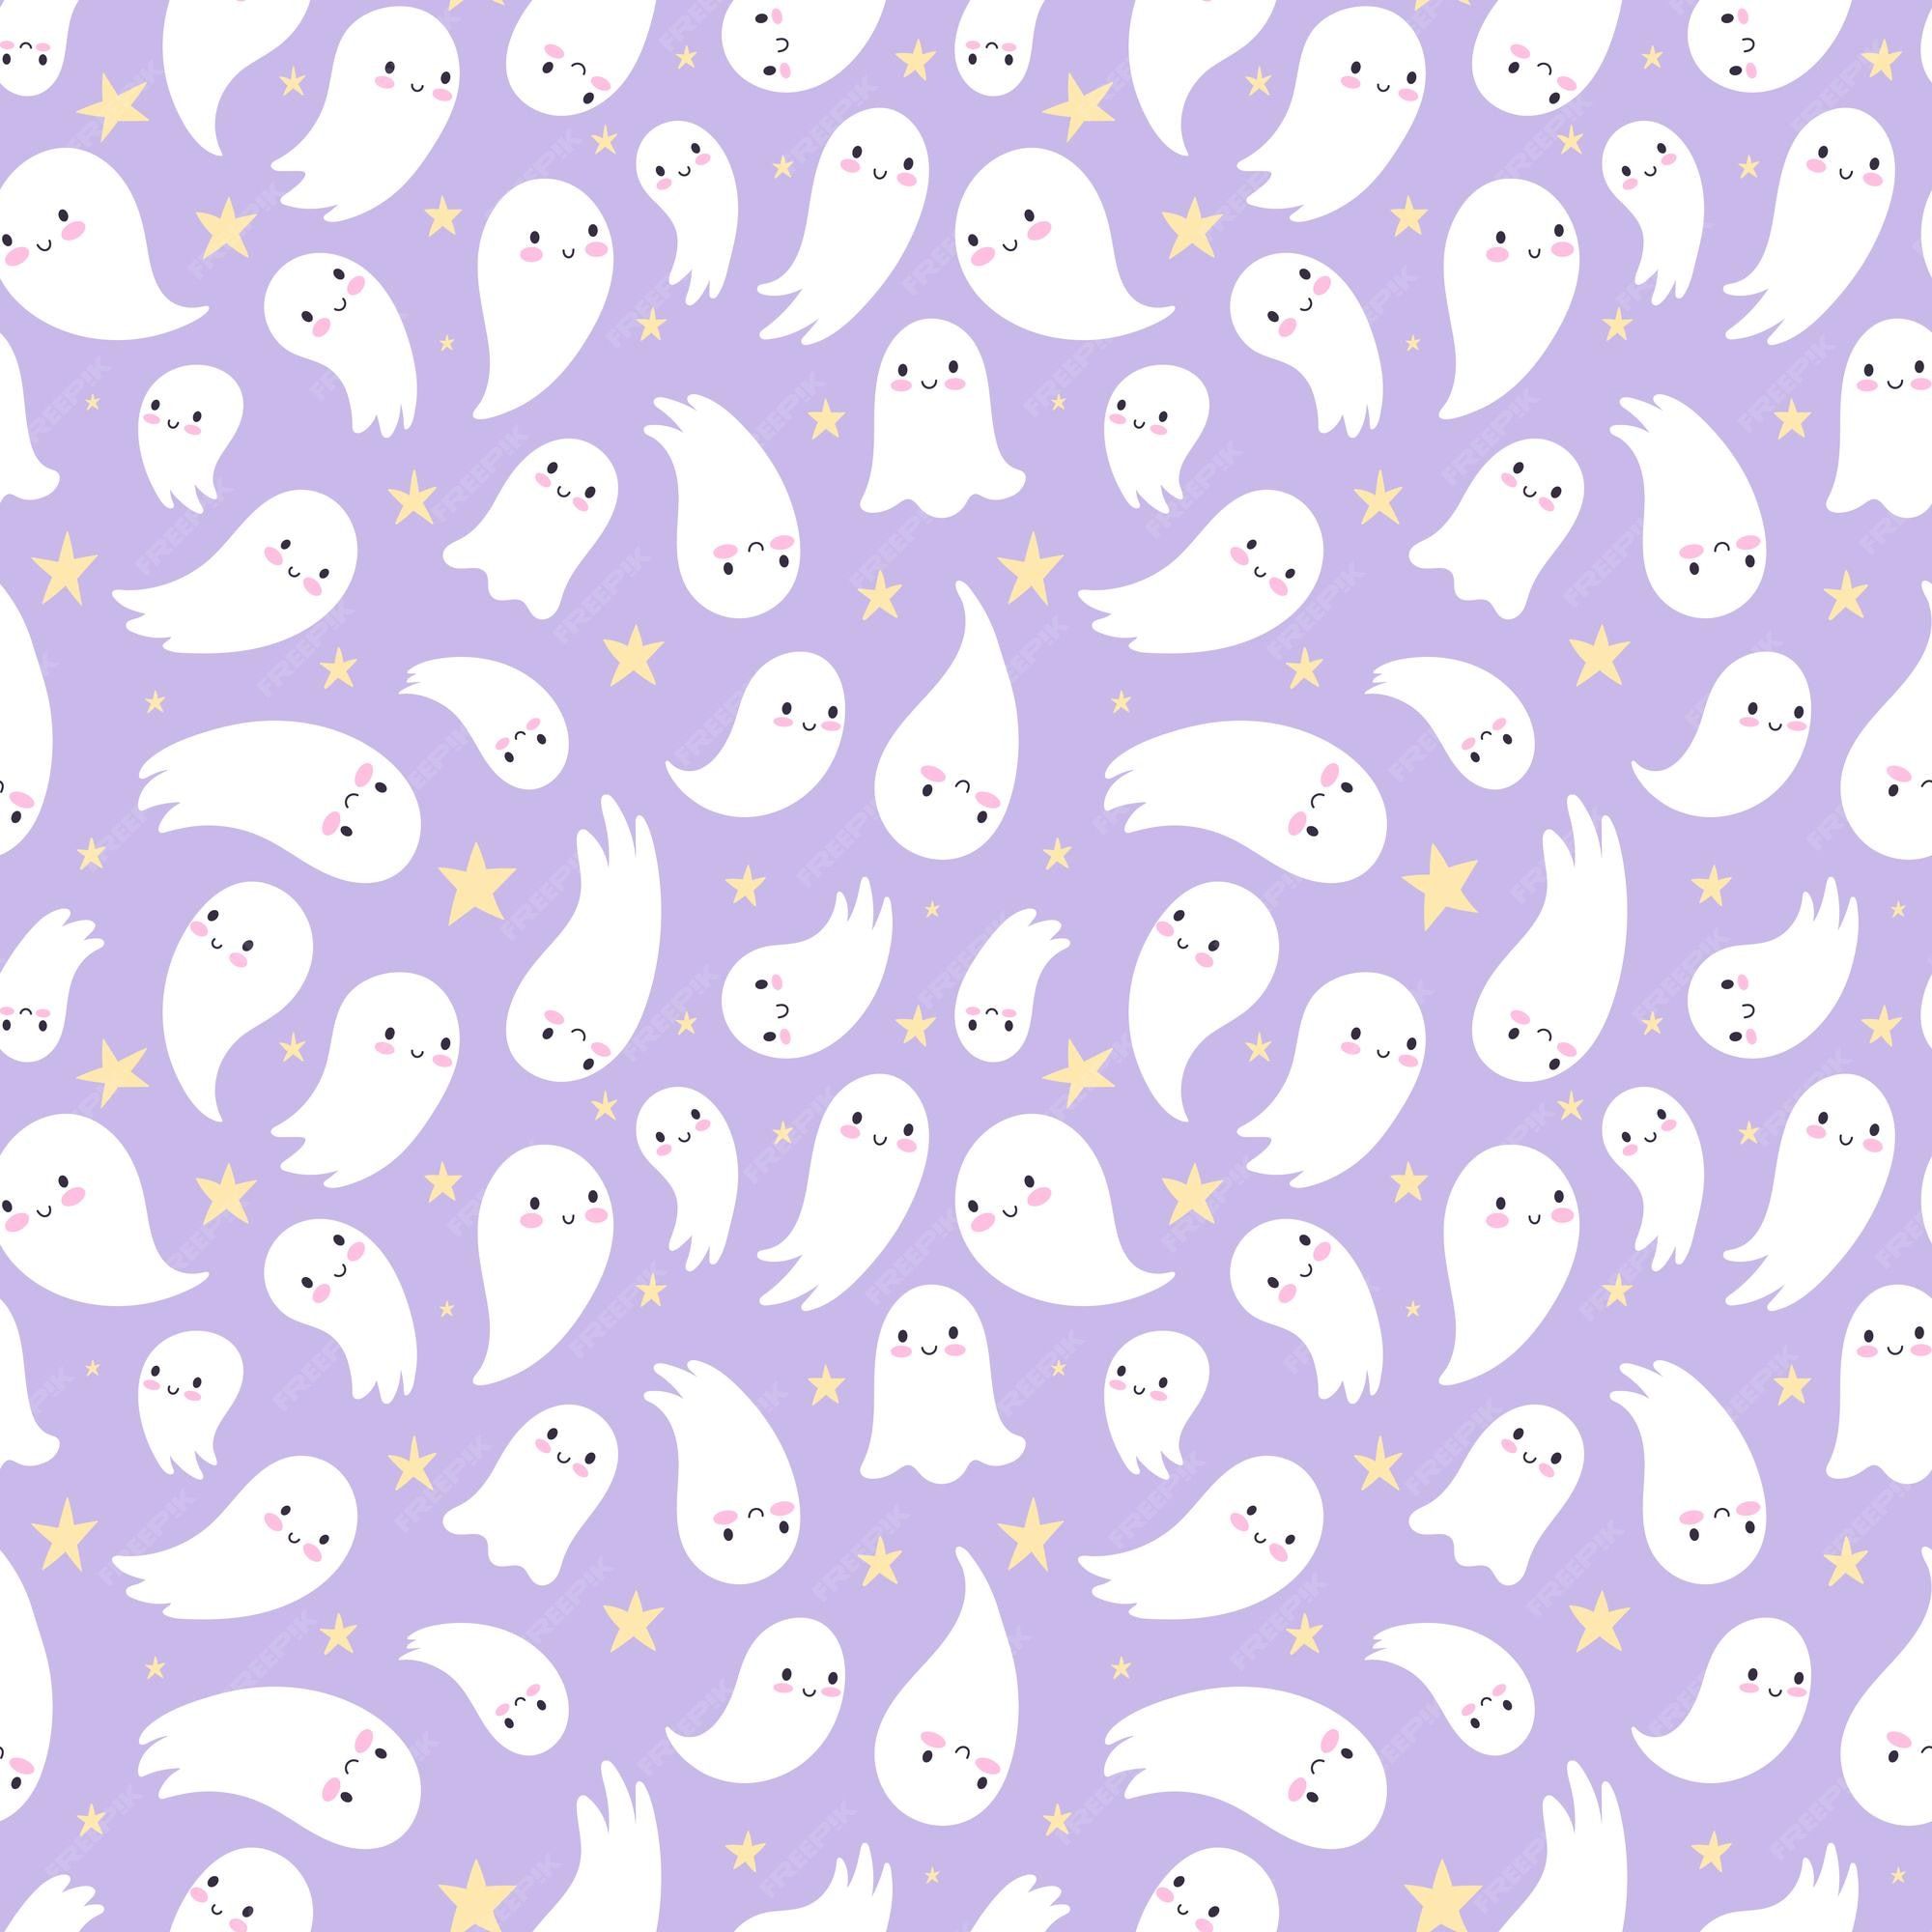 Premium Vector. Halloween seamless pattern childish seamless background with cute ghosts